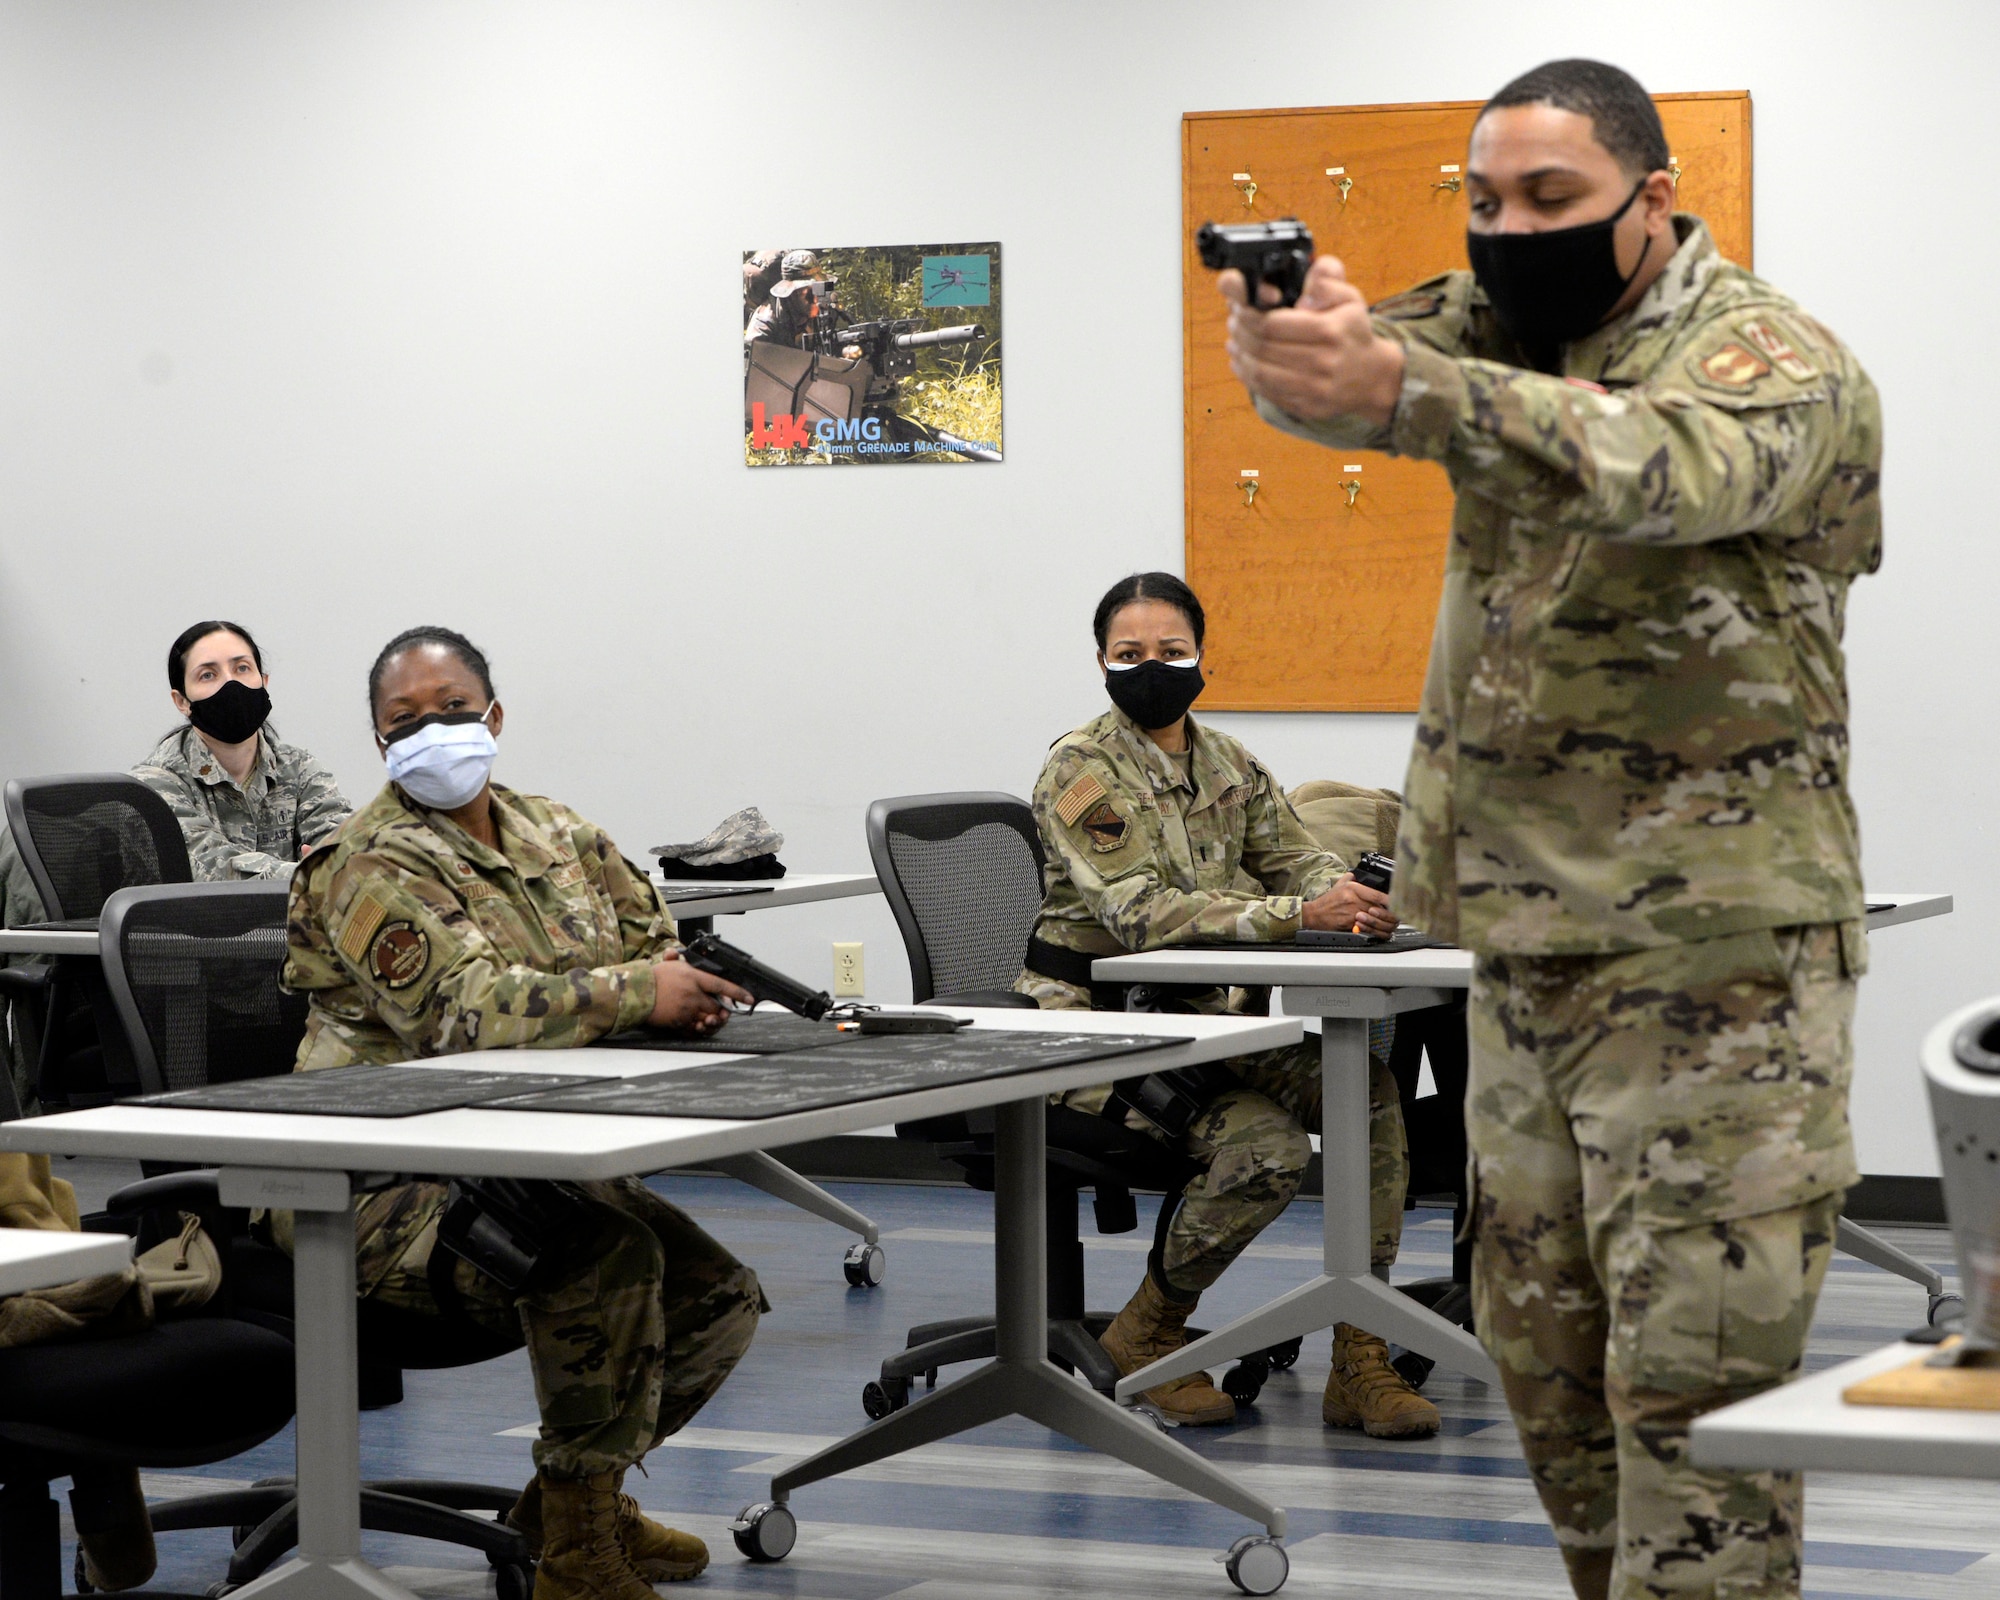 Air Force Senior Airman Jerome Fogg, an 88th Security Forces Squadron combat arms instructor, teaches sighting and posture for the M9 pistol during a qualification course at Wright-Patterson Air Force Base, Ohio on Feb. 18, 2021. Weapons qualification is part of the readiness standards for the 88th Air Base Wing. No live ammunition is allowed in the classroom portion of the qualification course. (U.S. Air Force photo by Ty Greenlees)